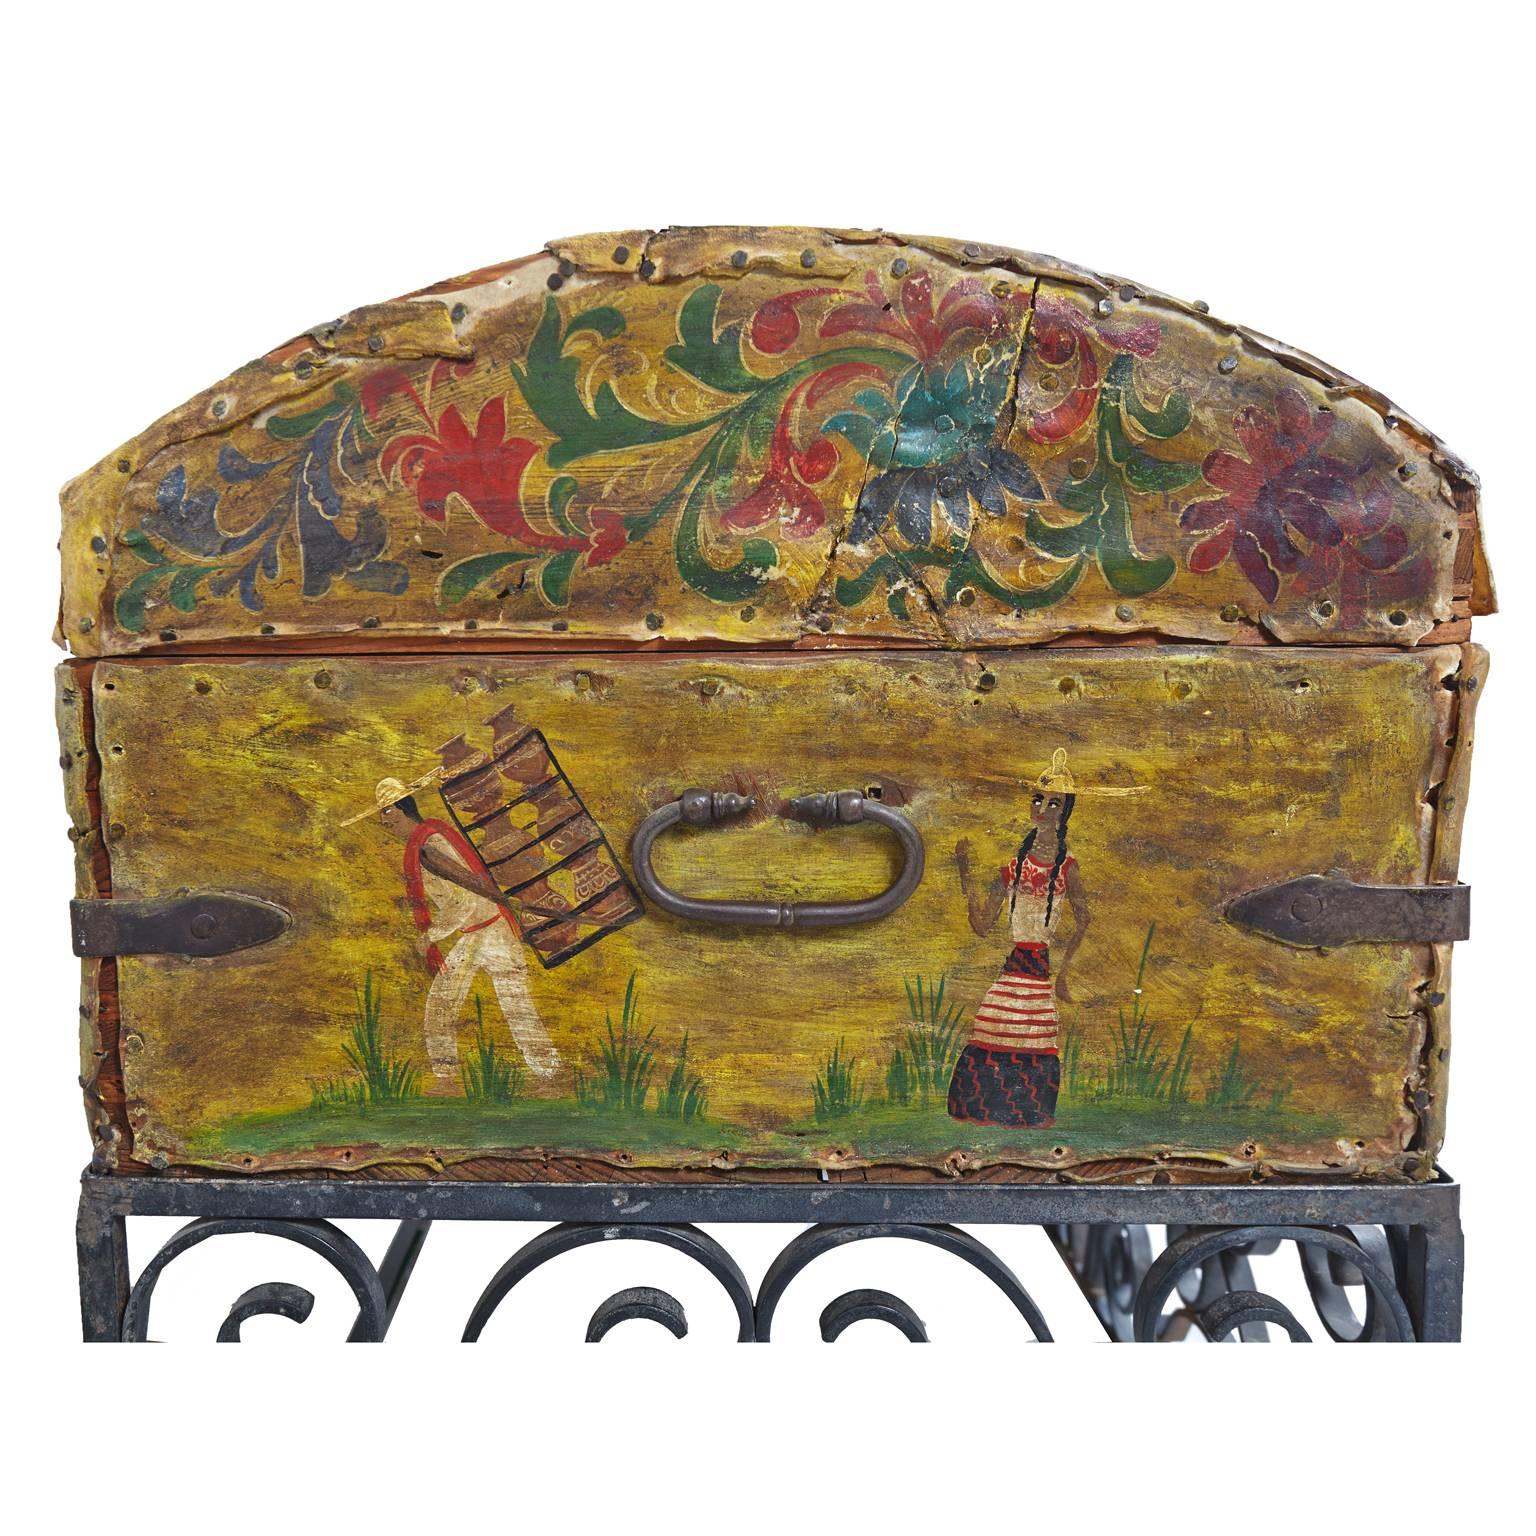 20th Century Salvador Corona Hand-Painted Leather Trunk with Wrought Iron Stand